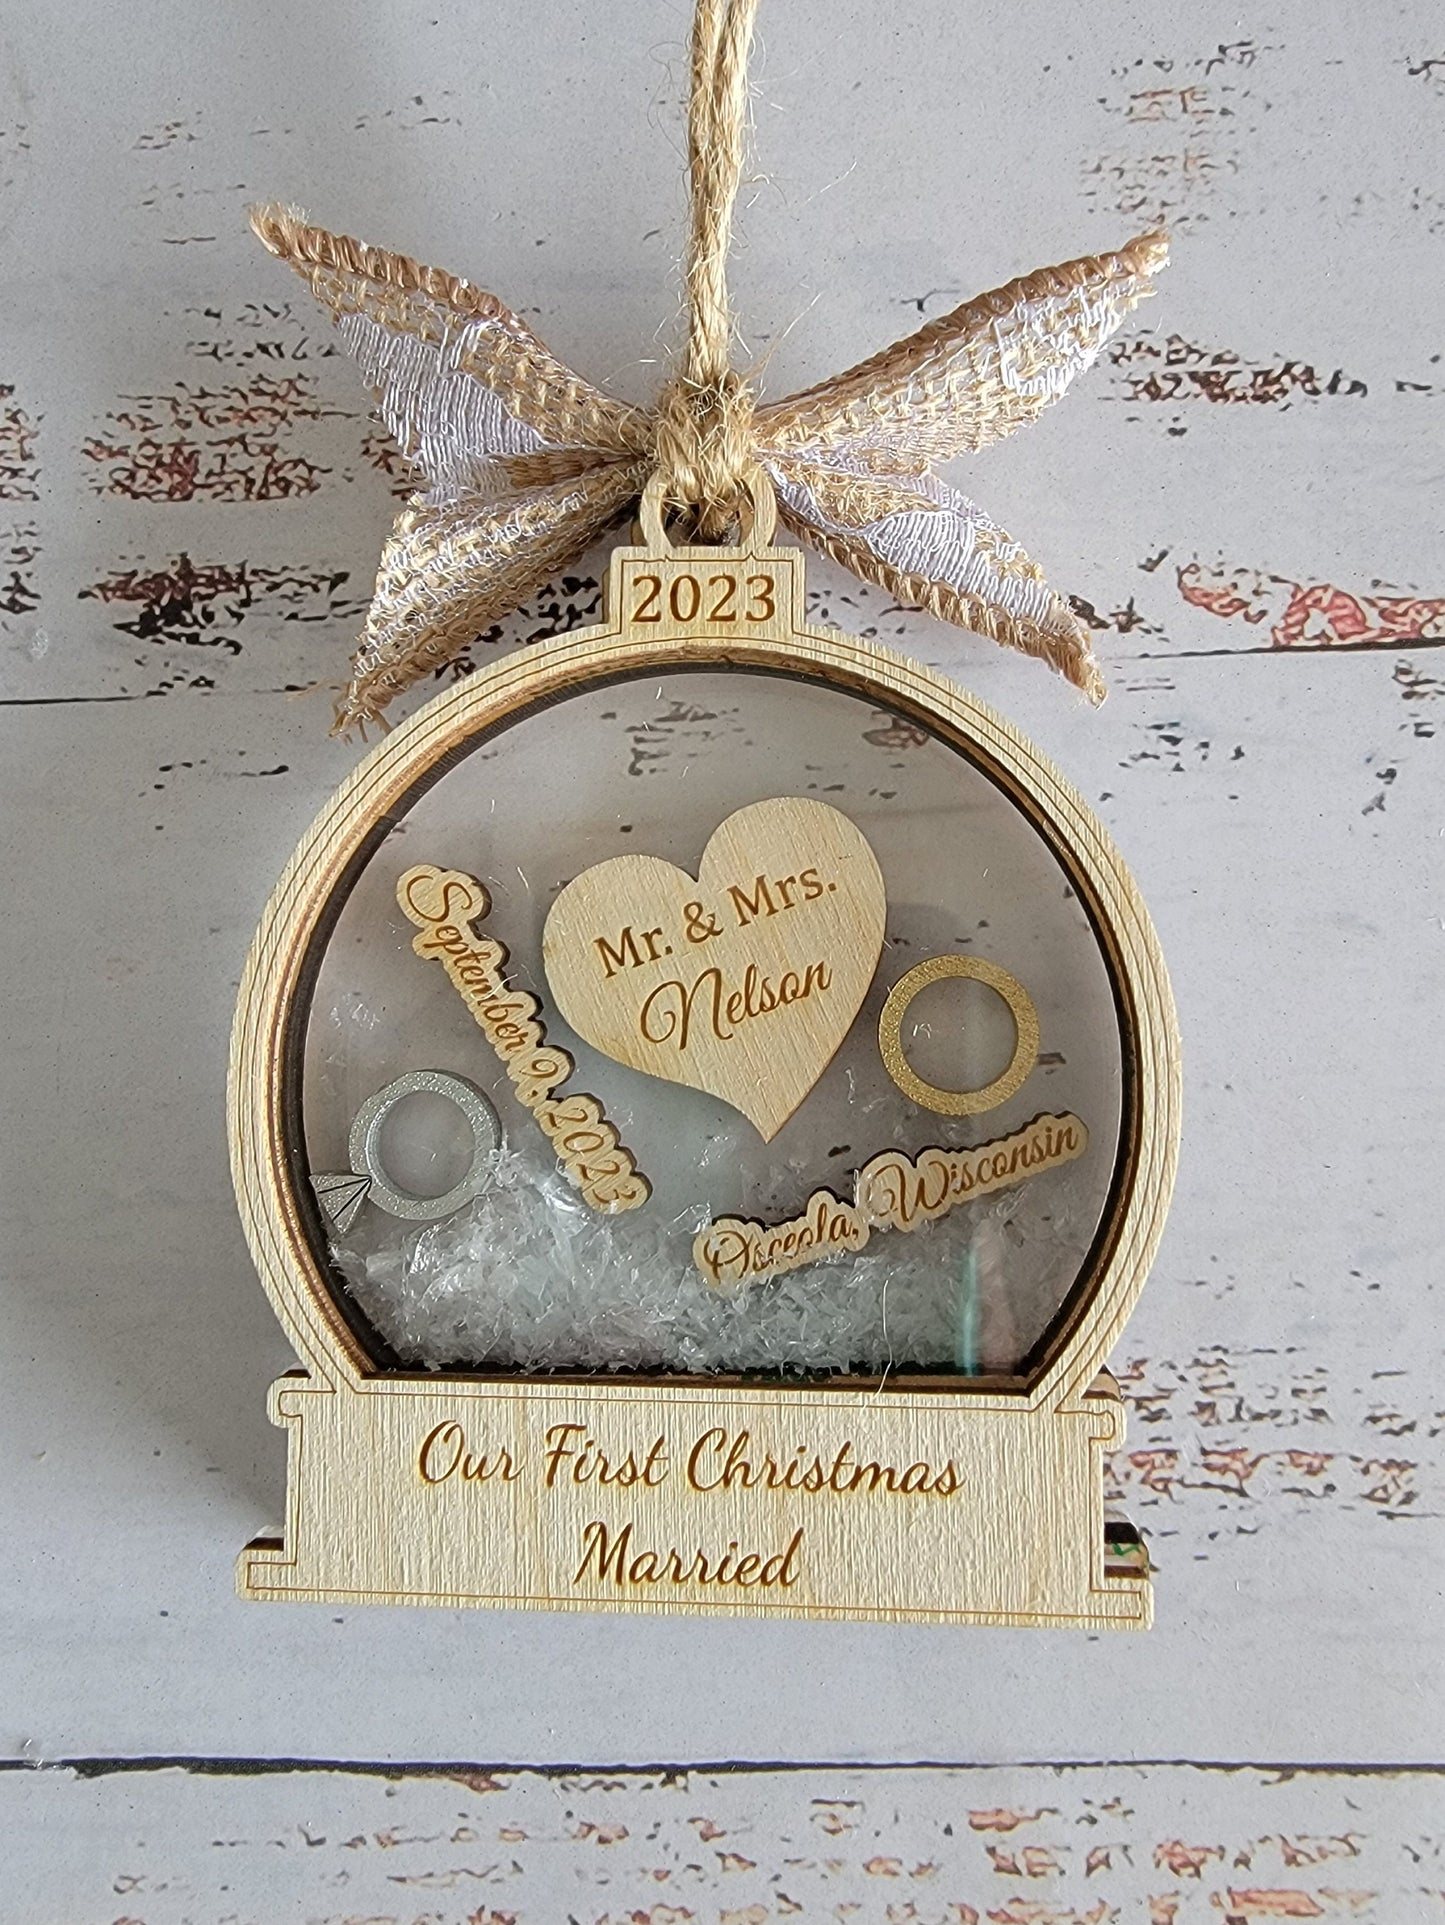 First Christmas Married Ornament 2022 / 2023 Personalized First Christmas Married Ornament, Christmas Tree Ornaments, Wedding Gift